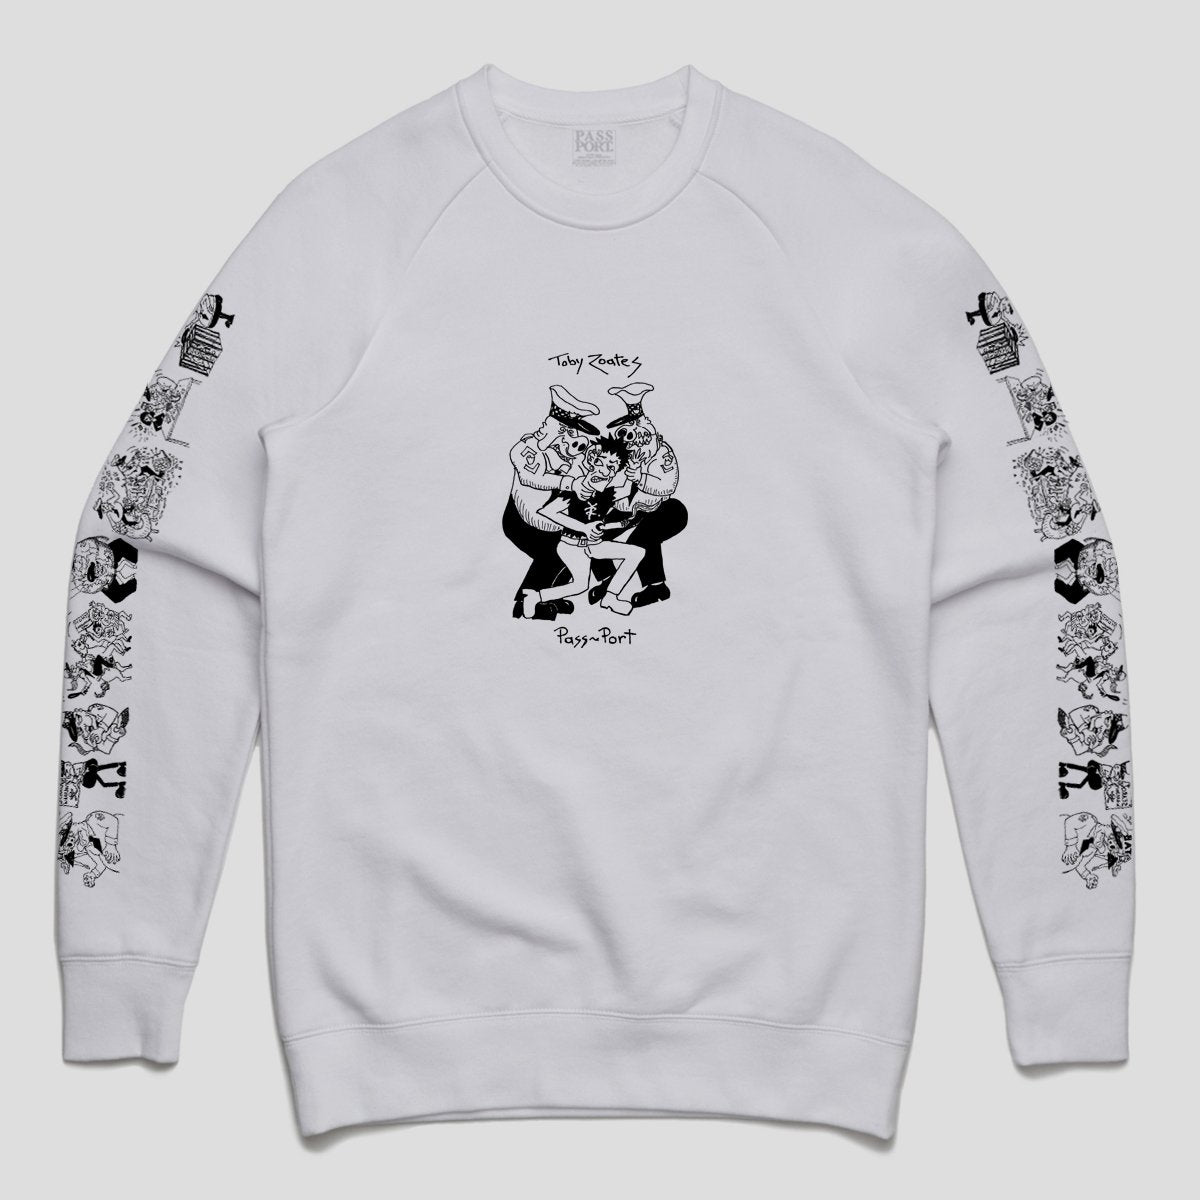 PASS~PORT TOBY ZOATES "COPPERS" SWEATER WHITE